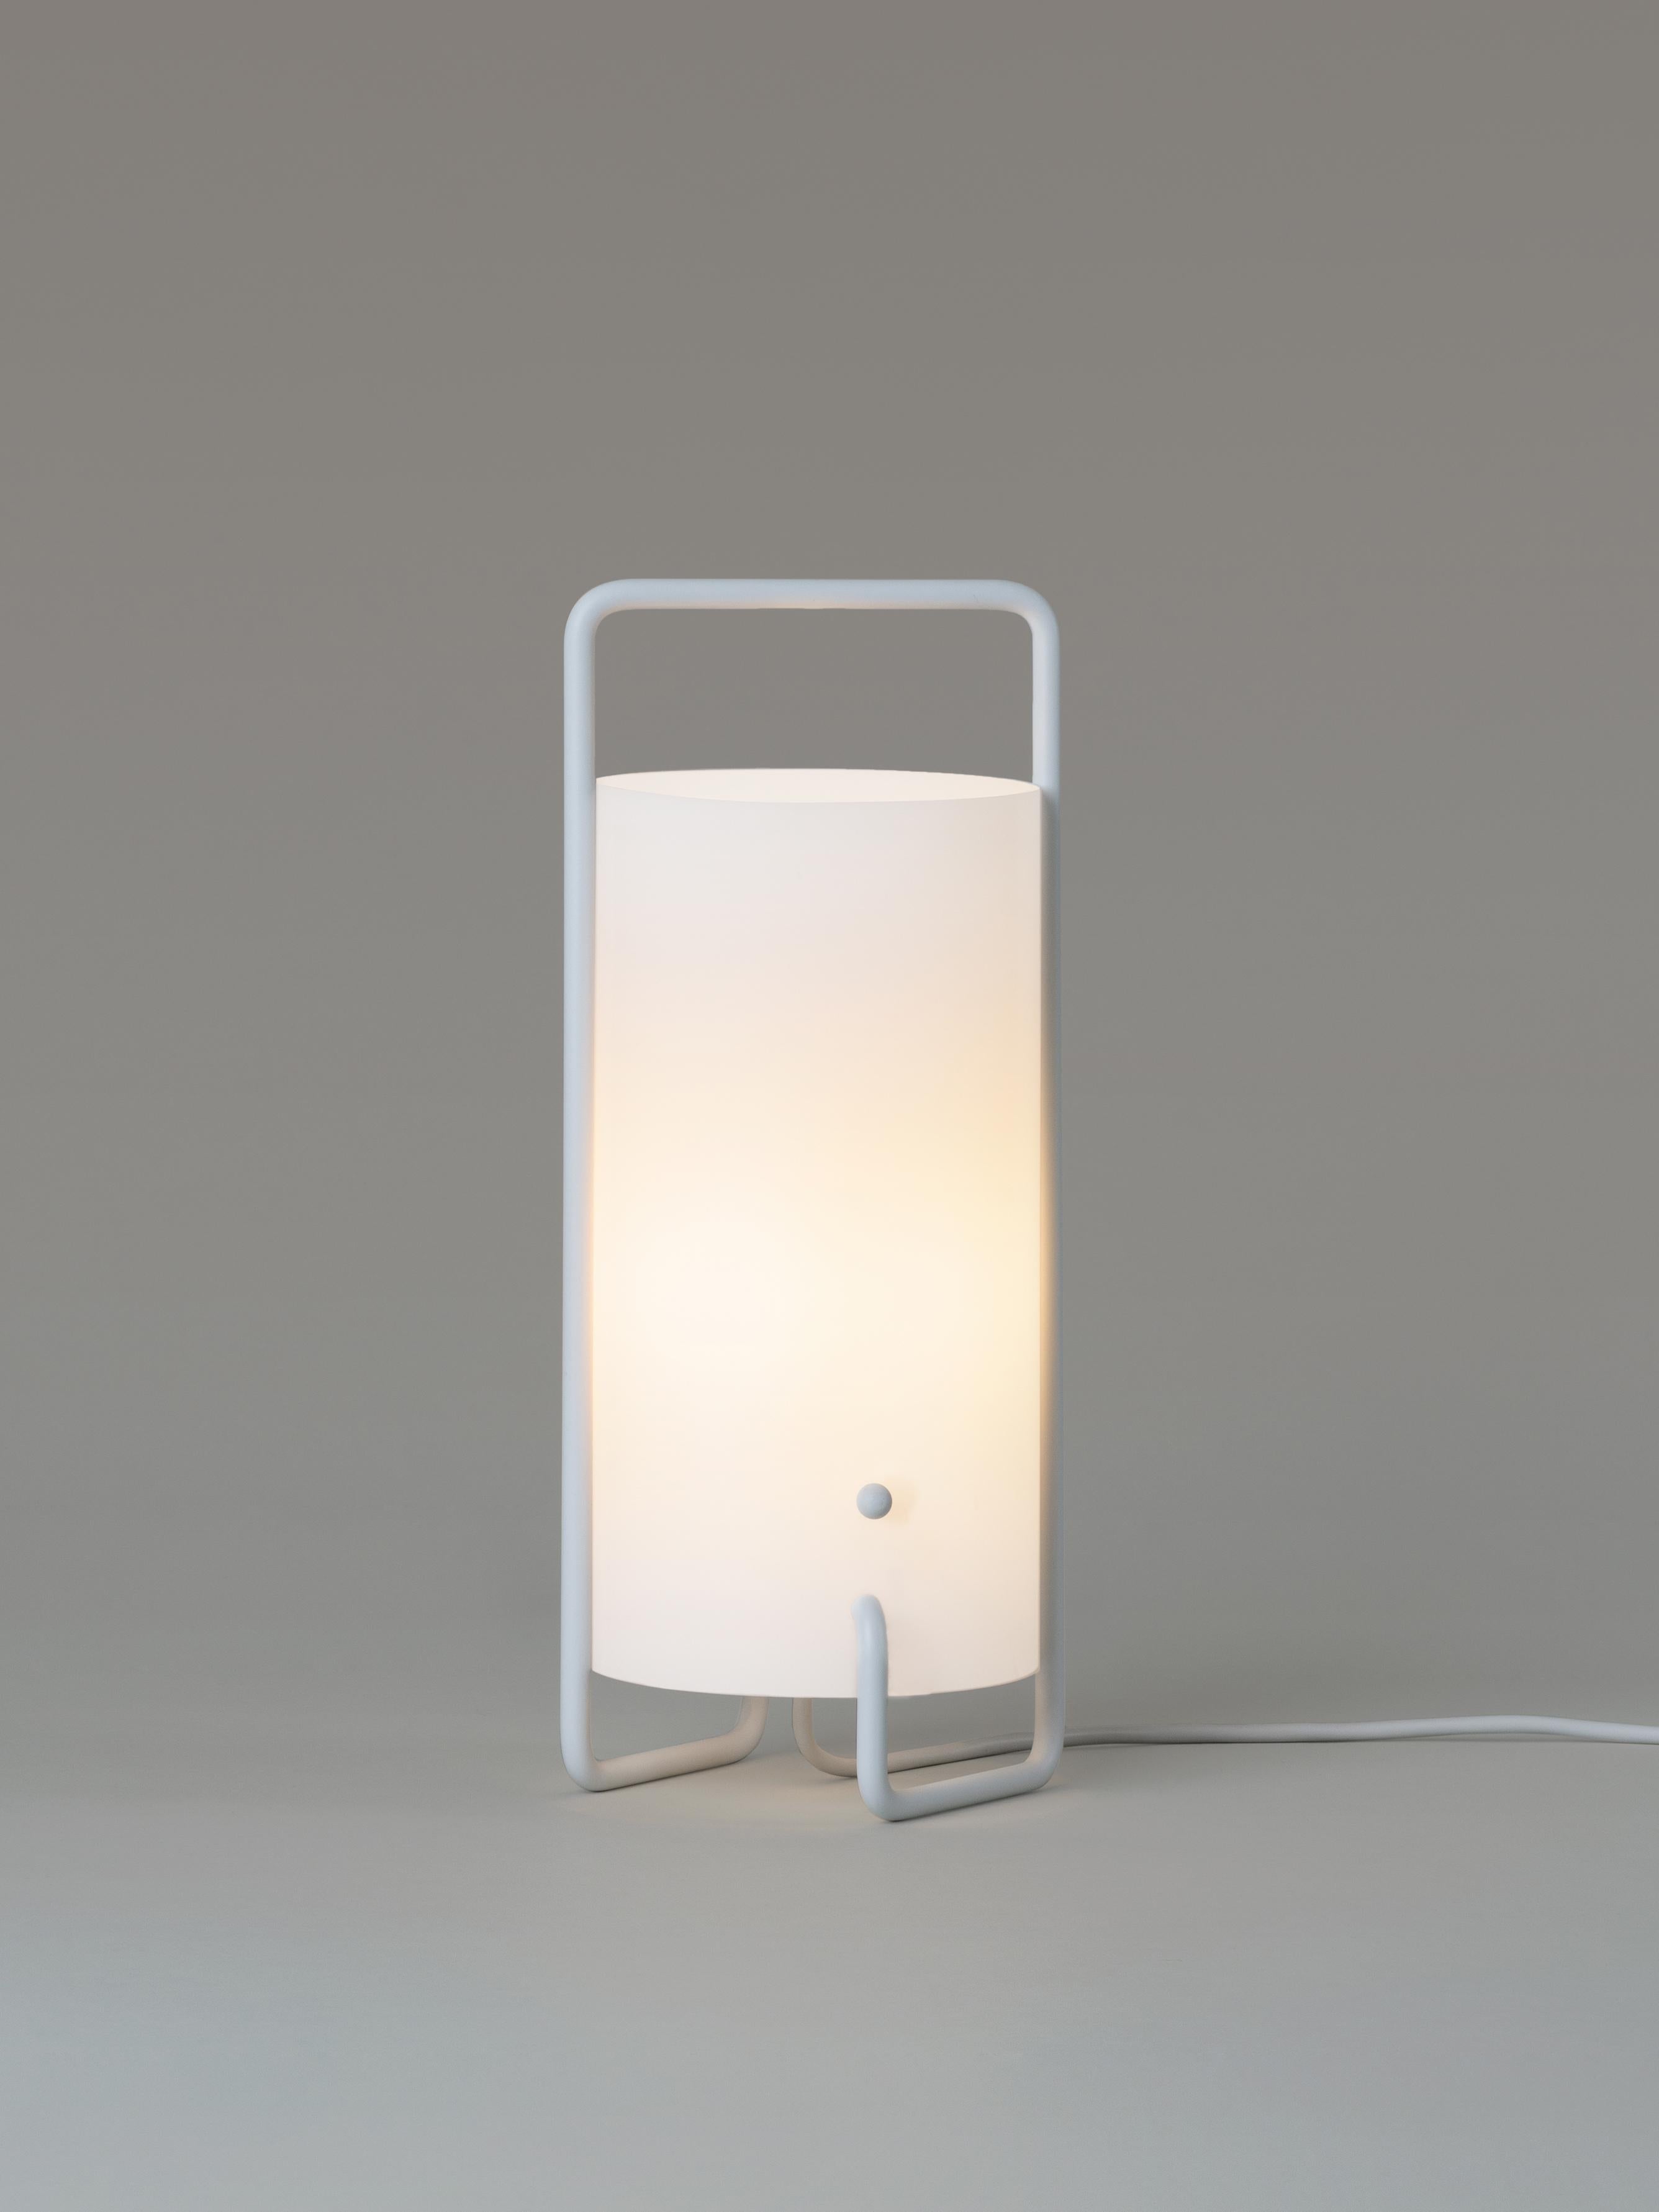 White Asa table lamp by Miguel Mila.
Dimensions: D 15 x H 41 cm.
Materials: Metal, methacrylate shade.

Asa is built of an ingenious, single, continuous tube structure which also defines the upper, handle-shaped structure for carrying. It has